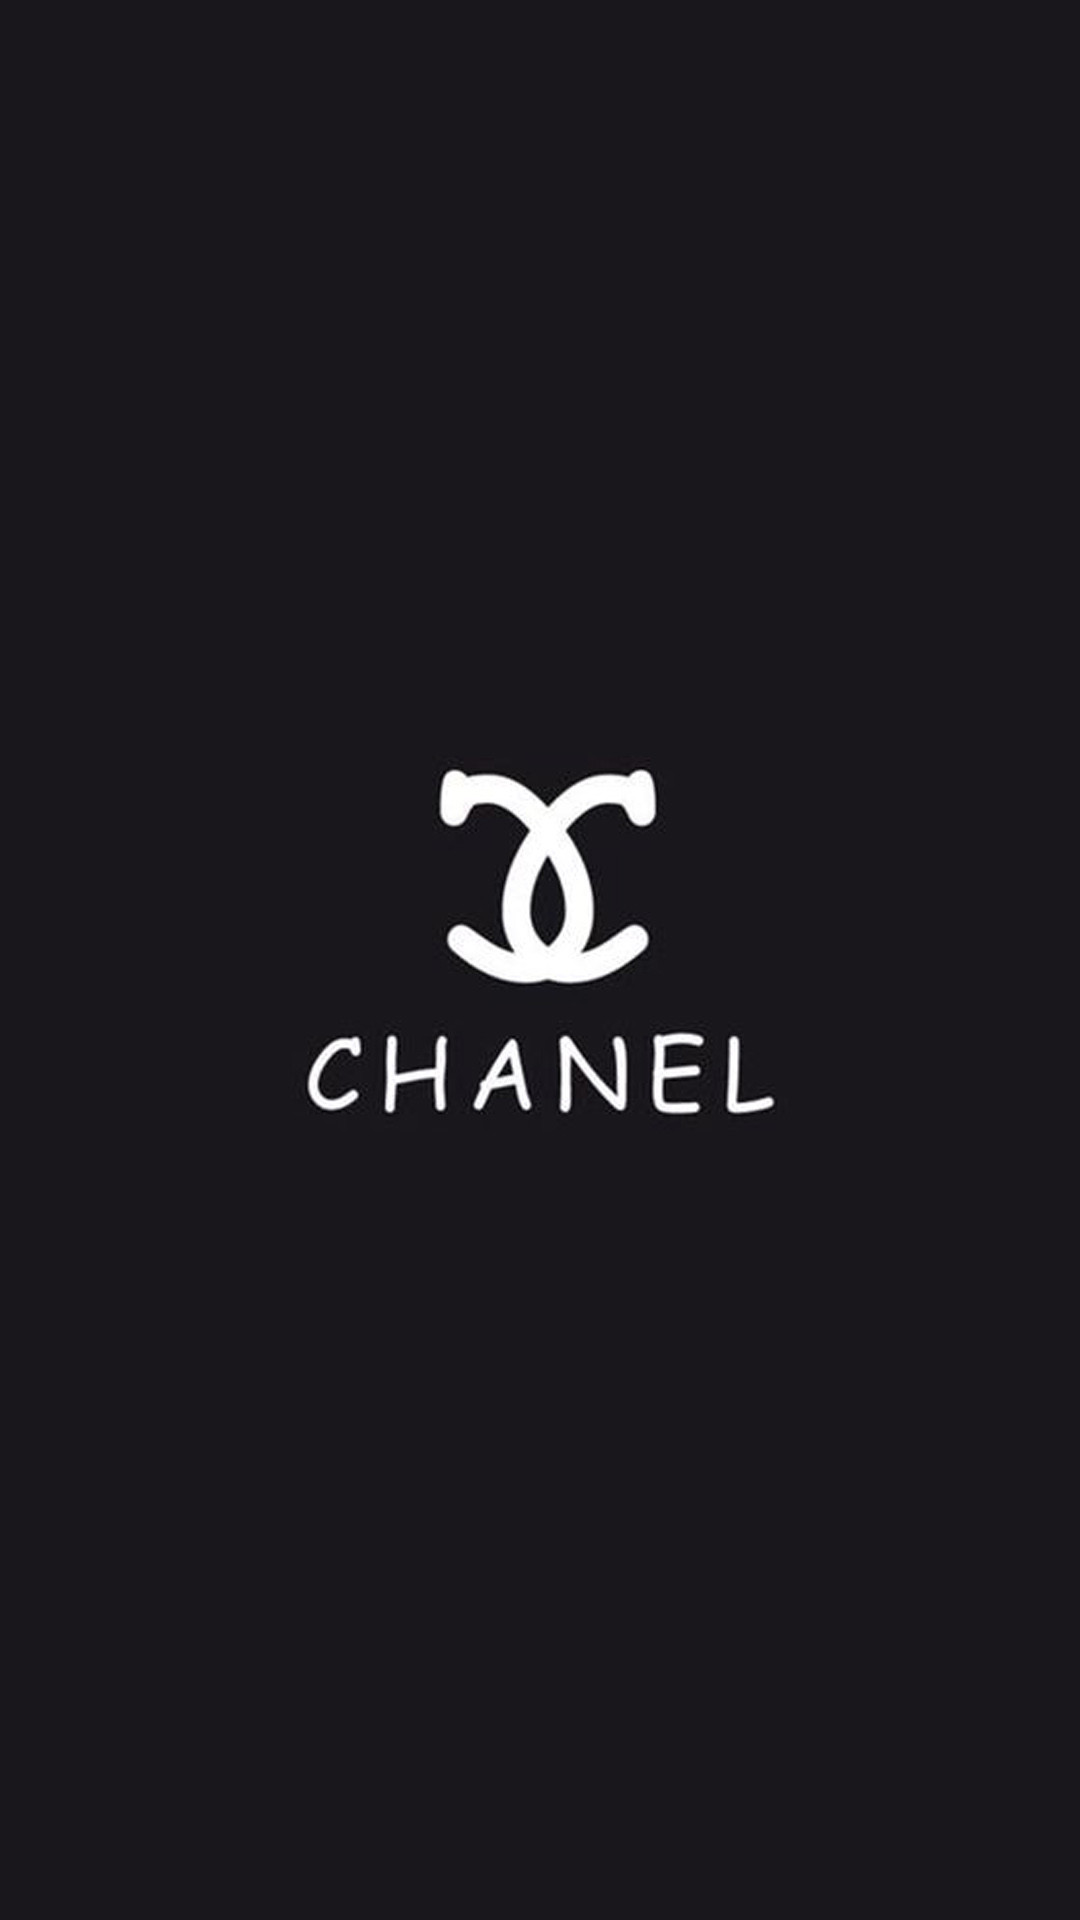 Chanel Wallpaper For Iphone | The Art